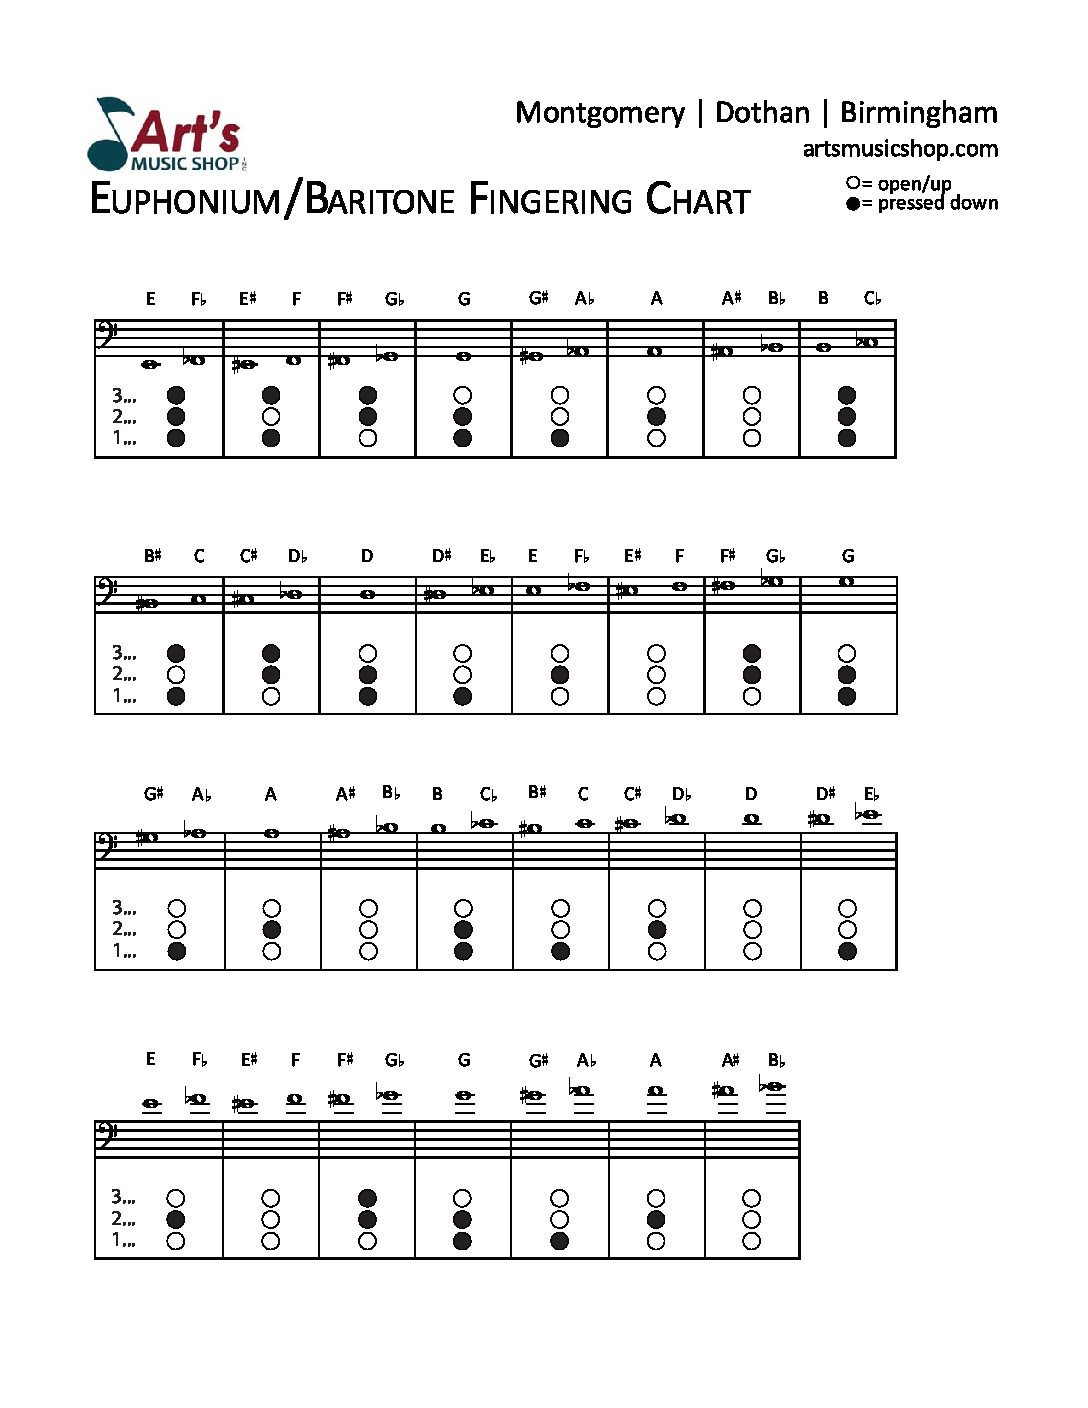 Baritone/Euph Fingering Chart Download courtesy of Art's Music Shop